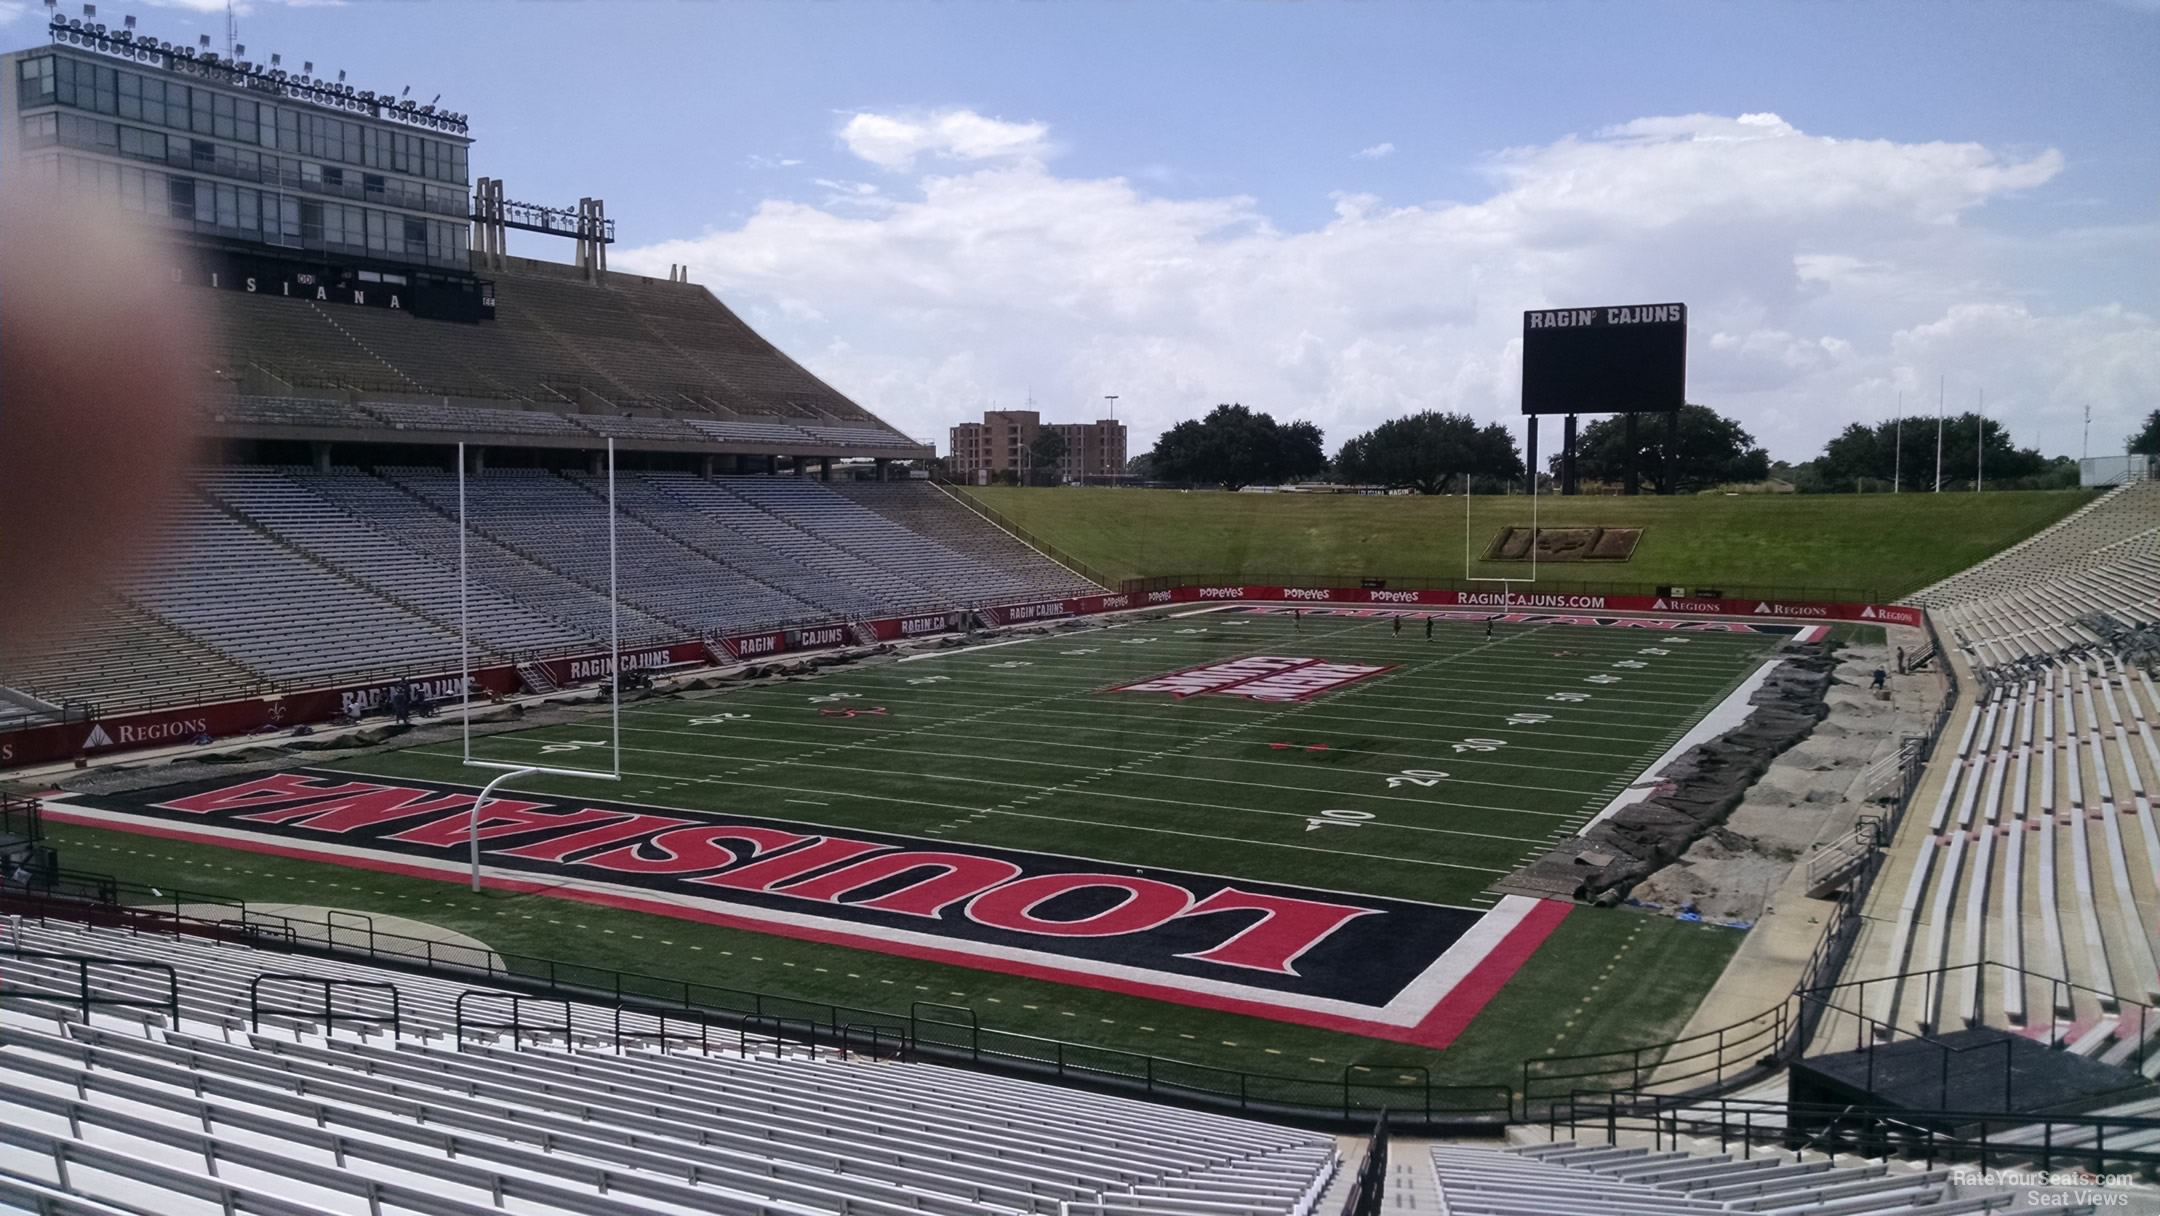 section v1, row 30 seat view  - cajun field